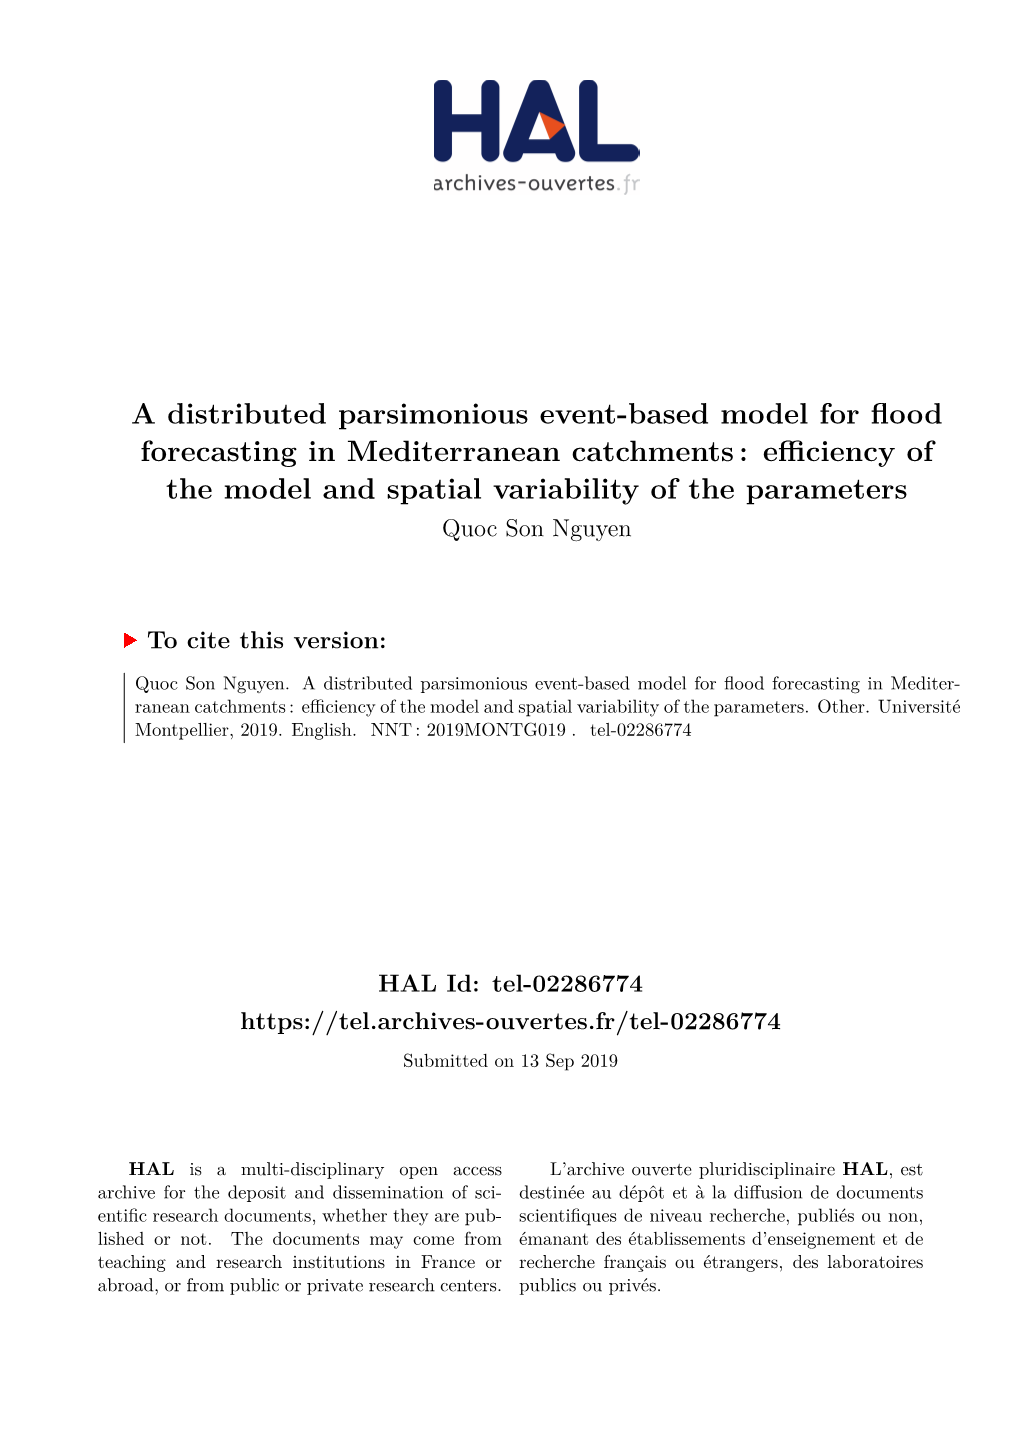 A Distributed Parsimonious Event-Based Model for Flood